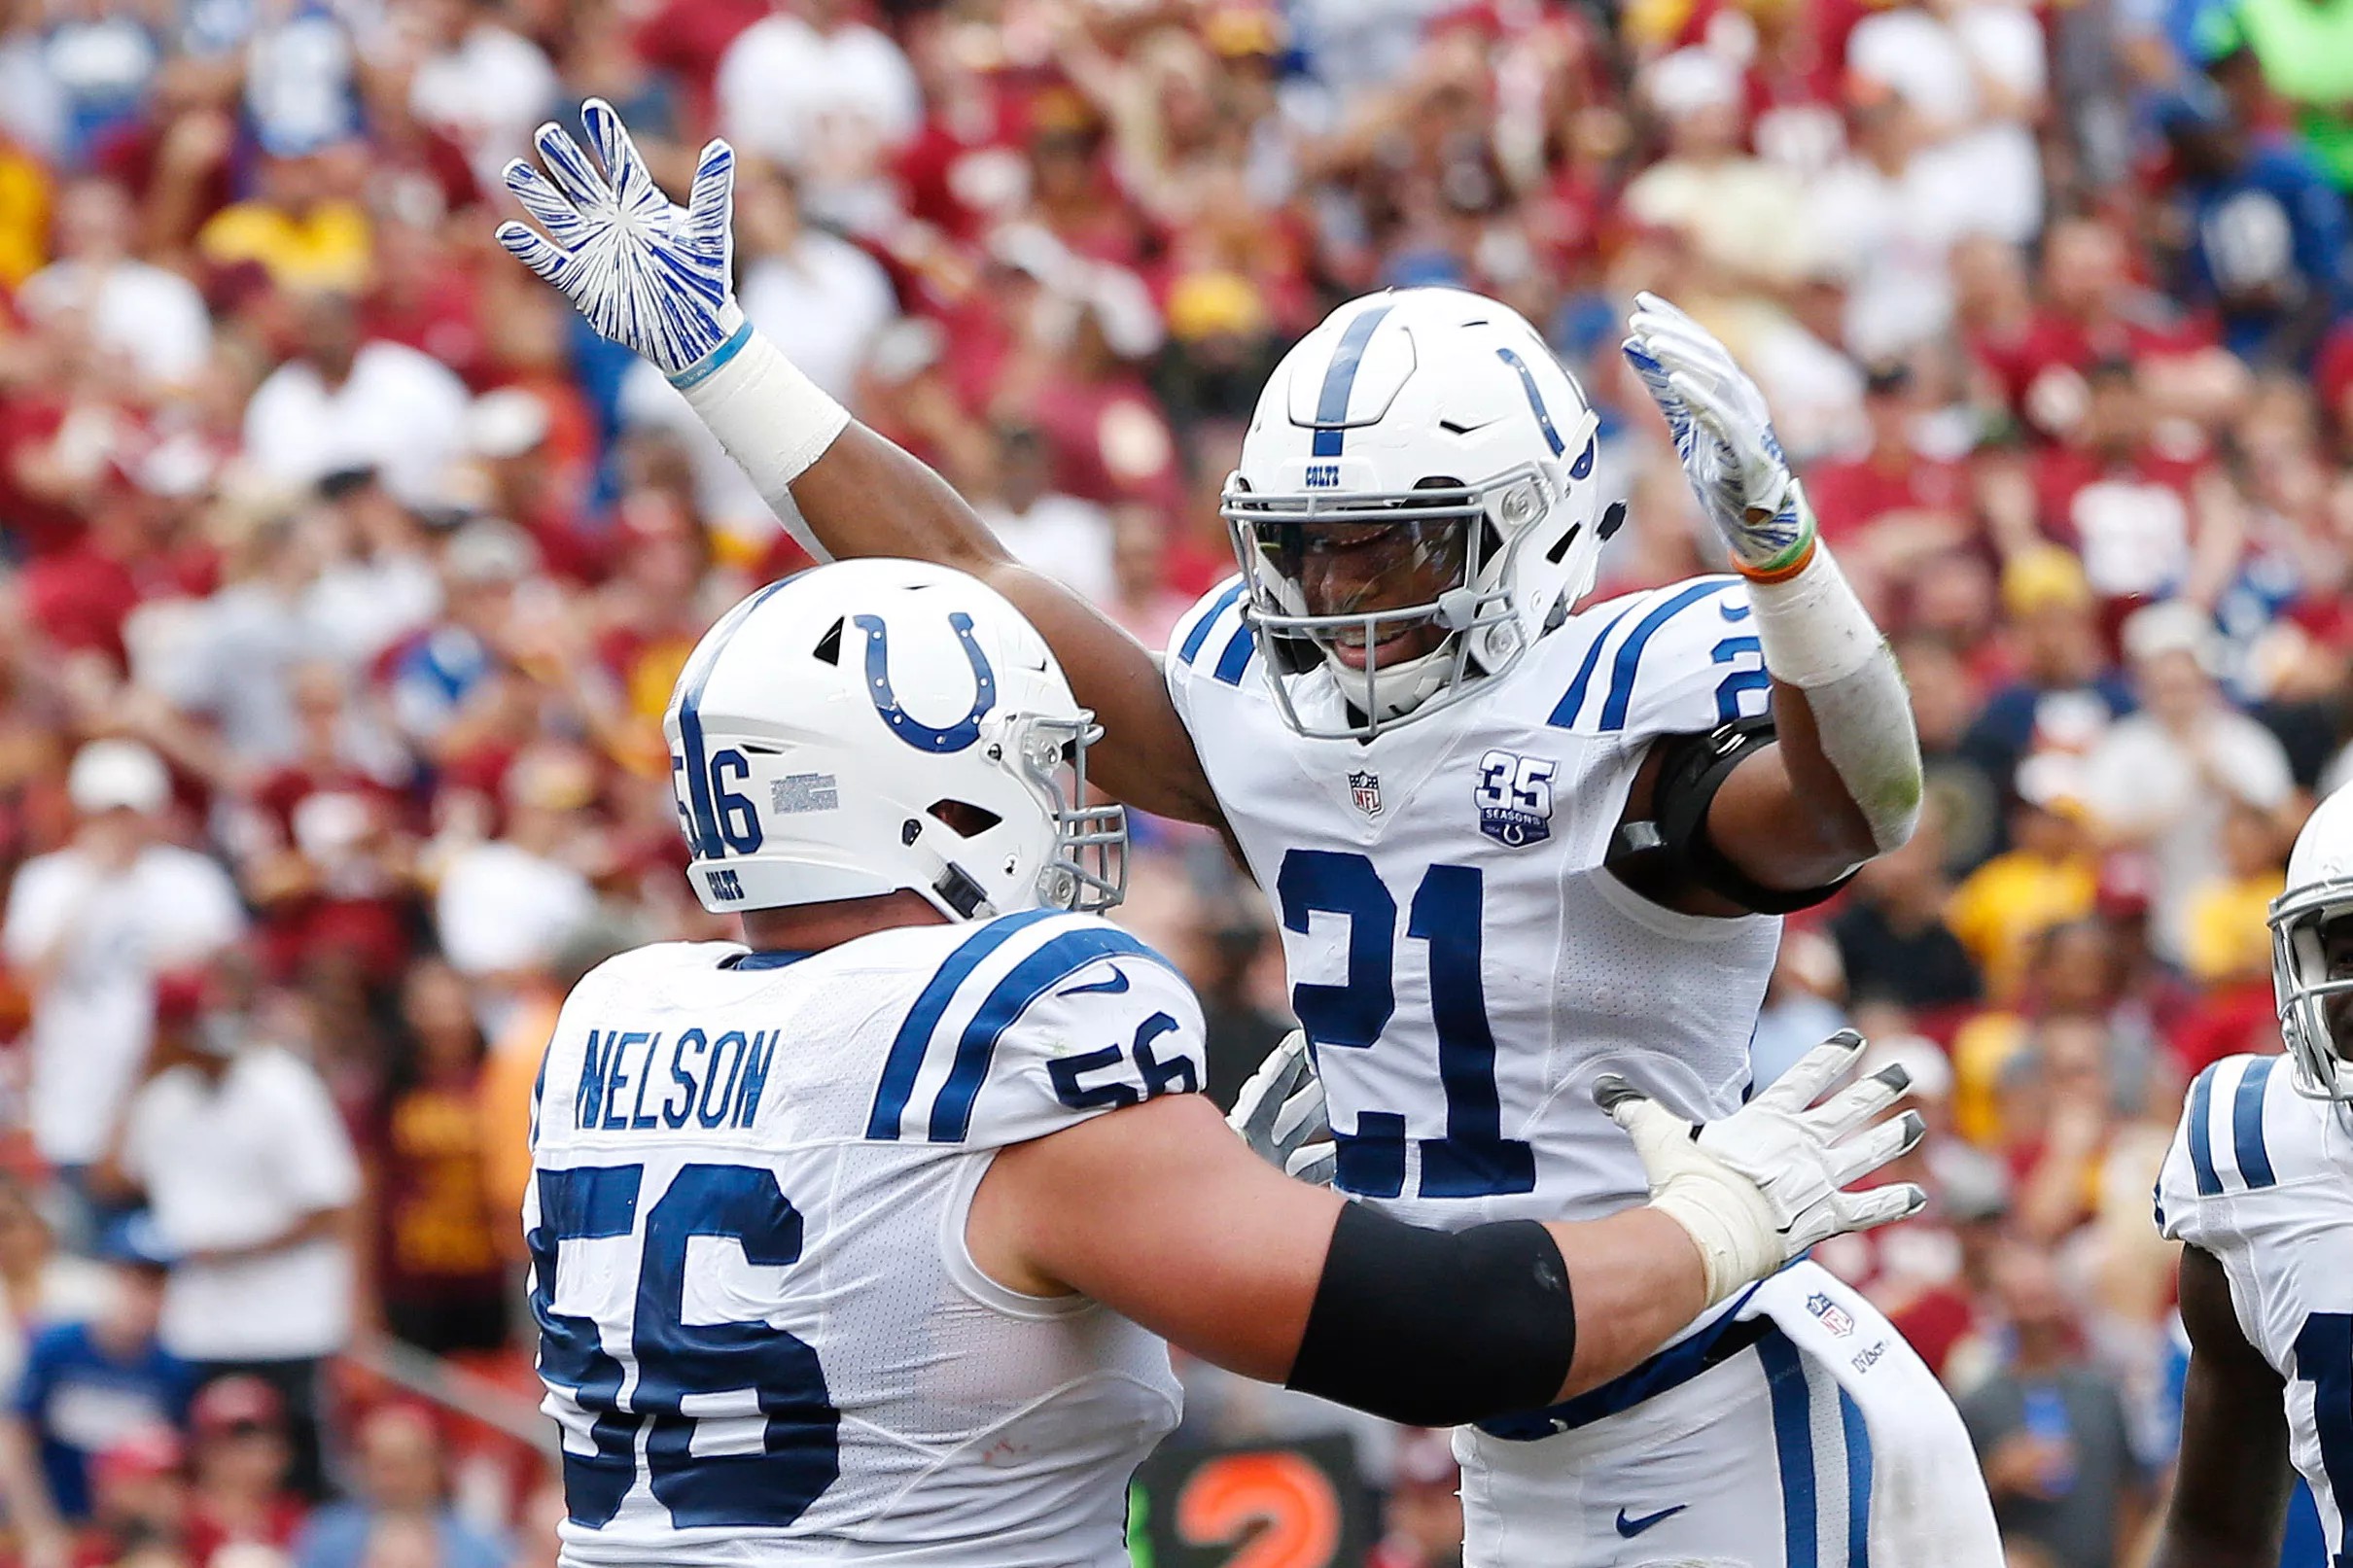 Here’s how good the Colts offensive line has been on their fourgame